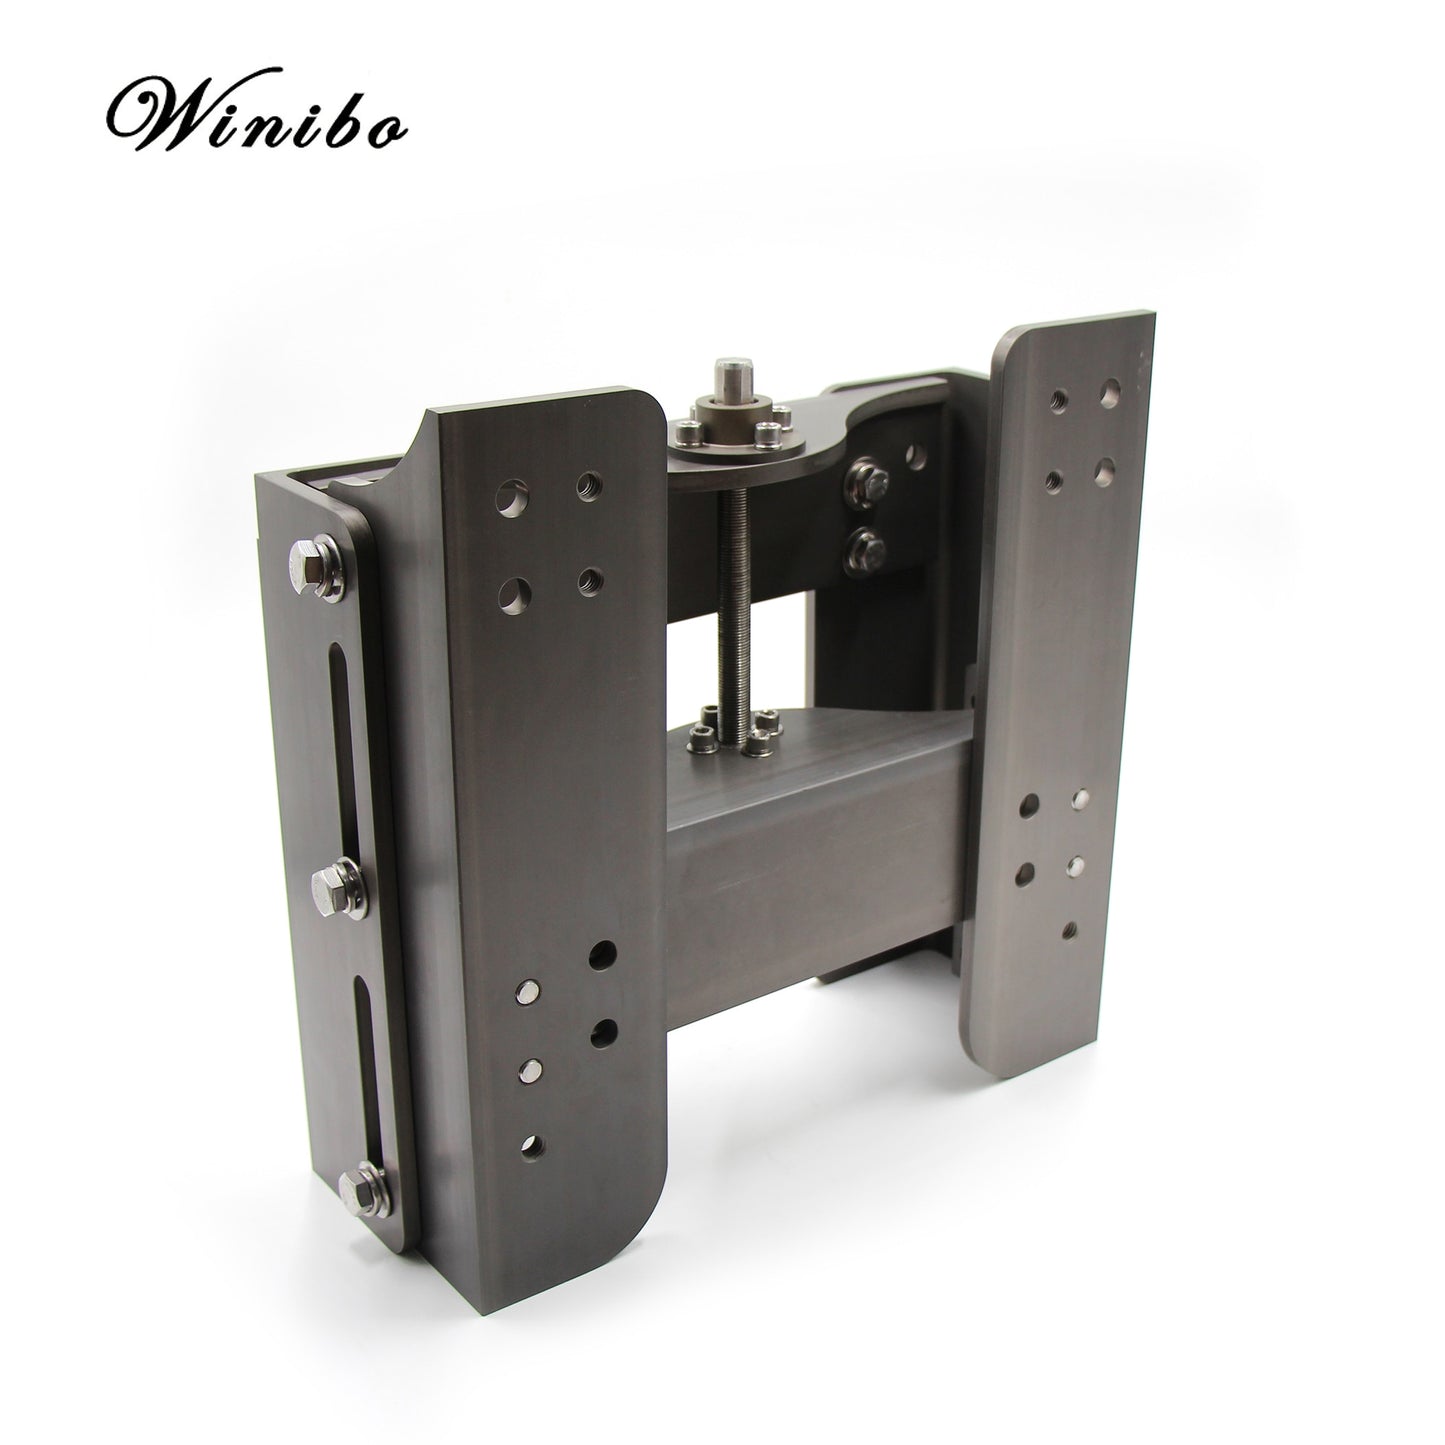 Winibo WJPMAA006 Manual Jack Plate 6inch Setback 5inch Vertical Extension For Outboard